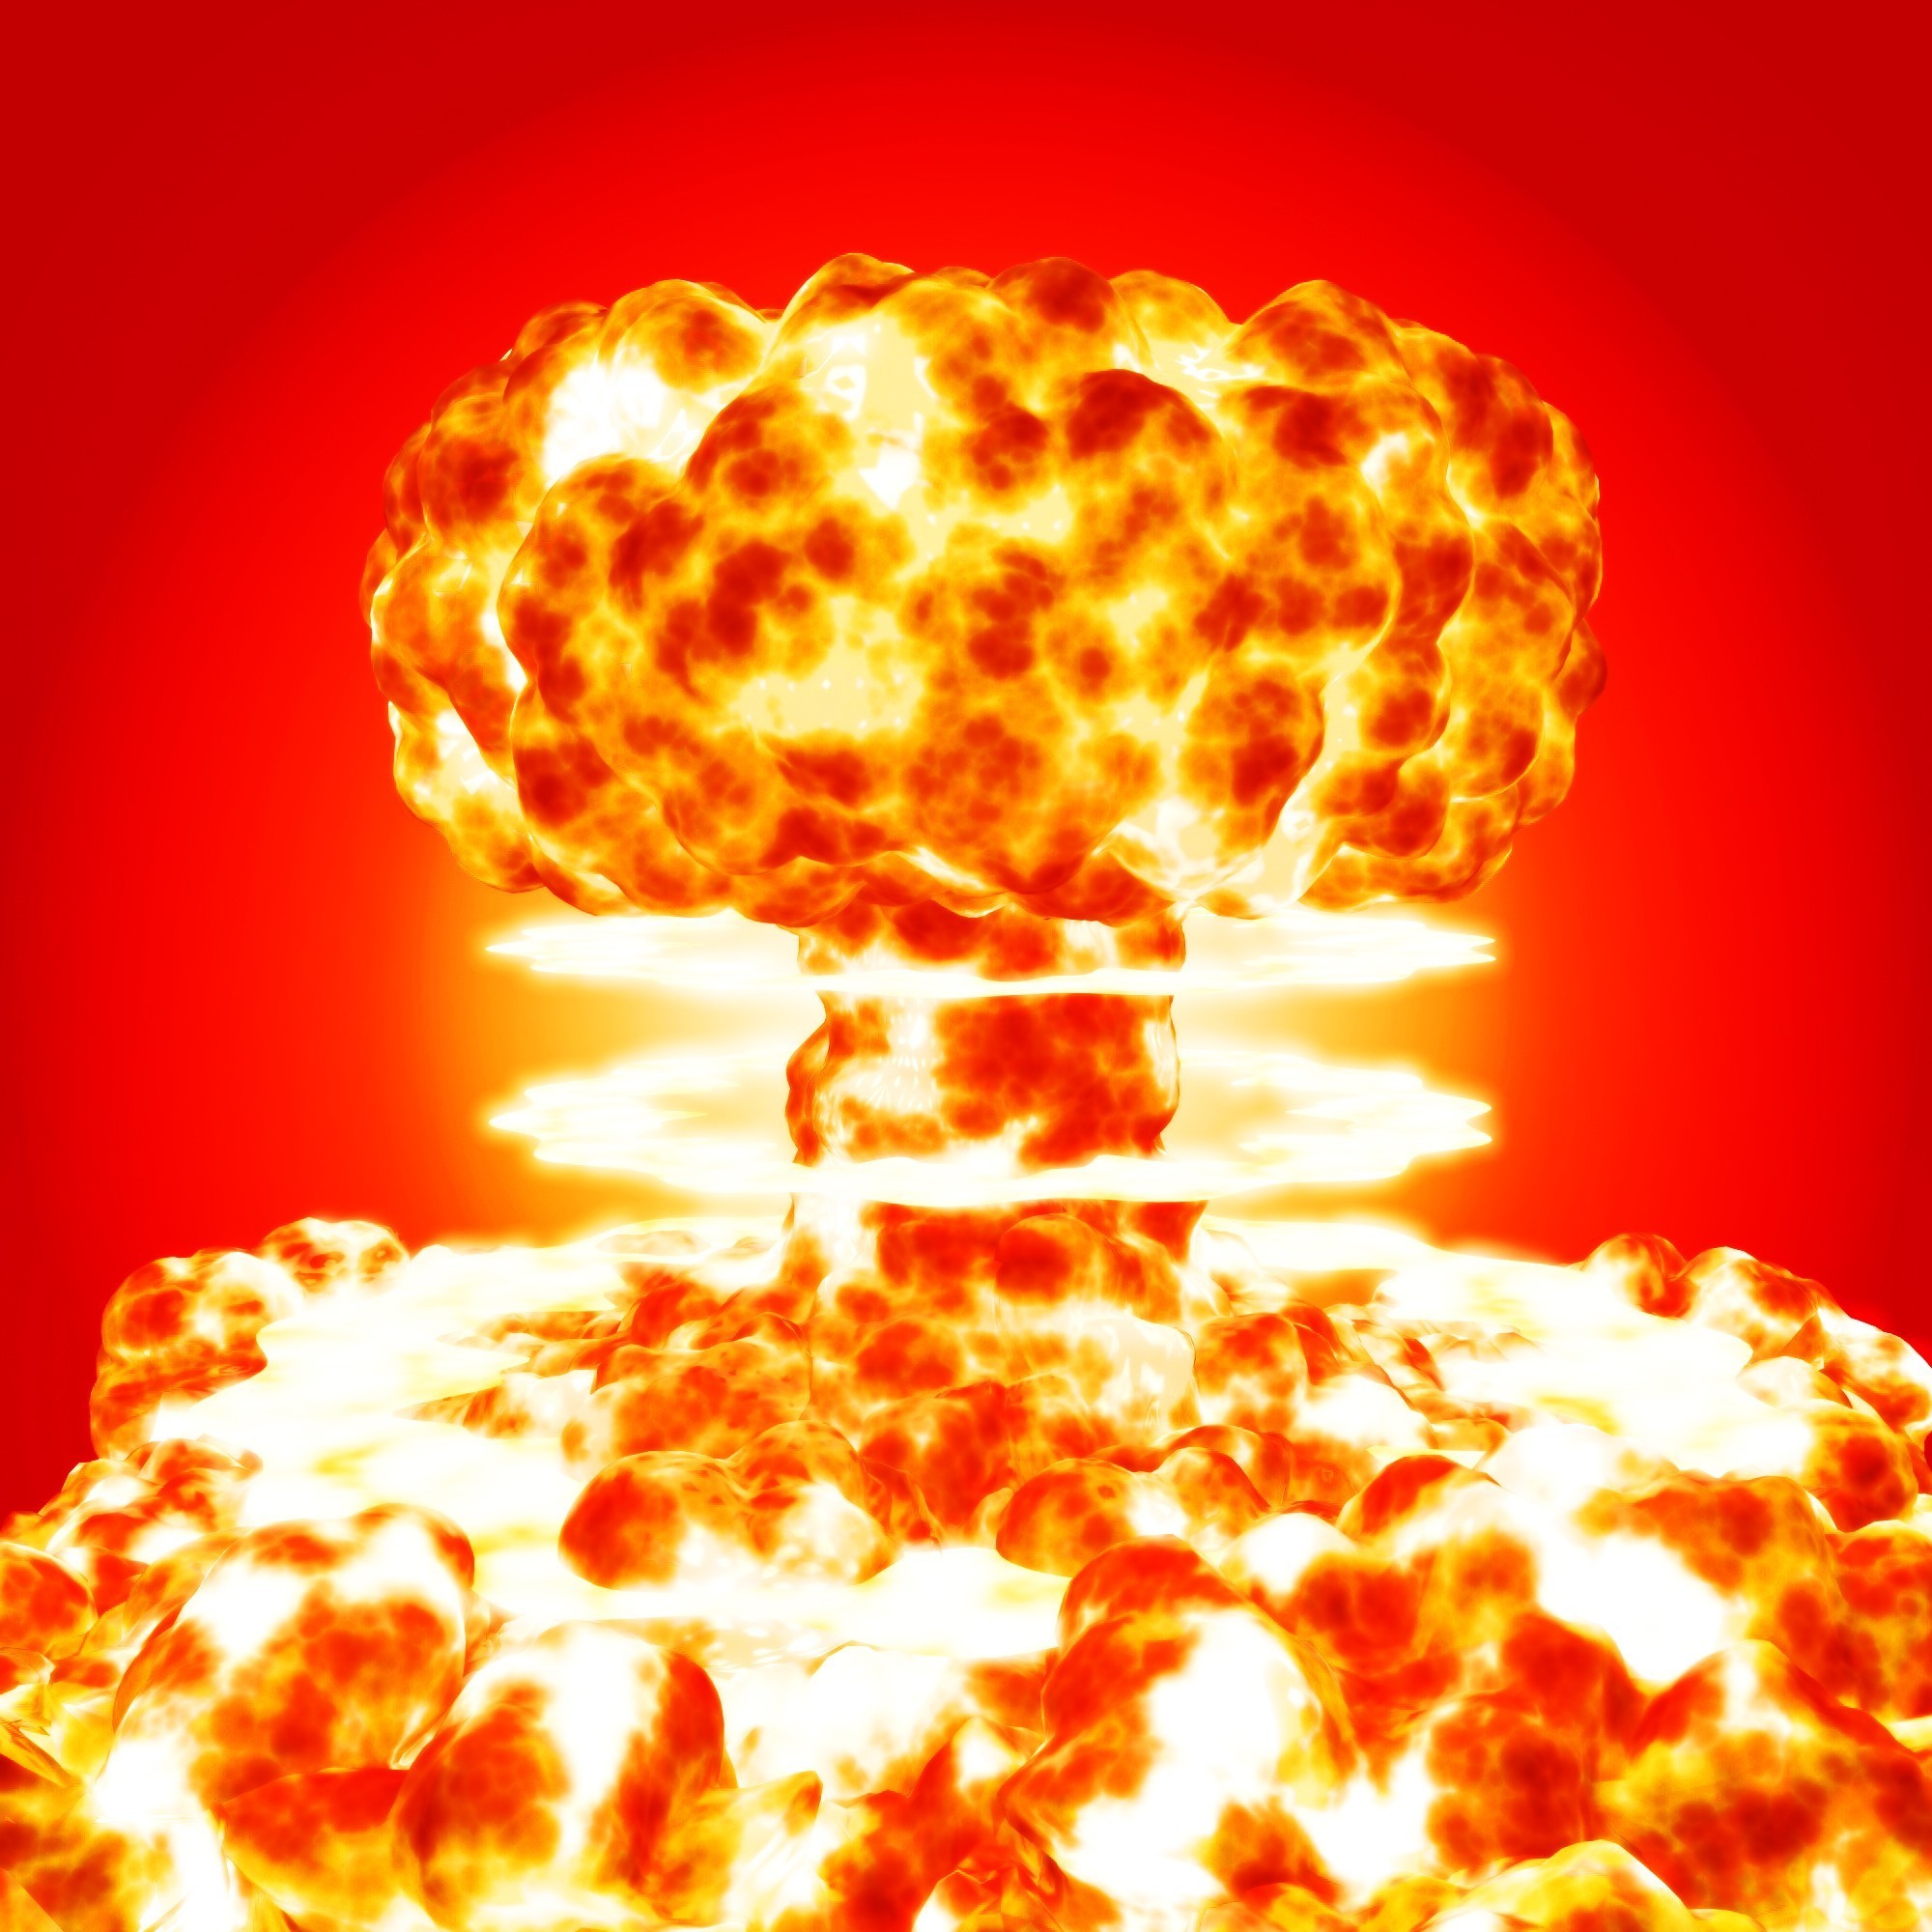 Sci Fi - Atomic Bomb Explosions , HD Wallpaper & Backgrounds